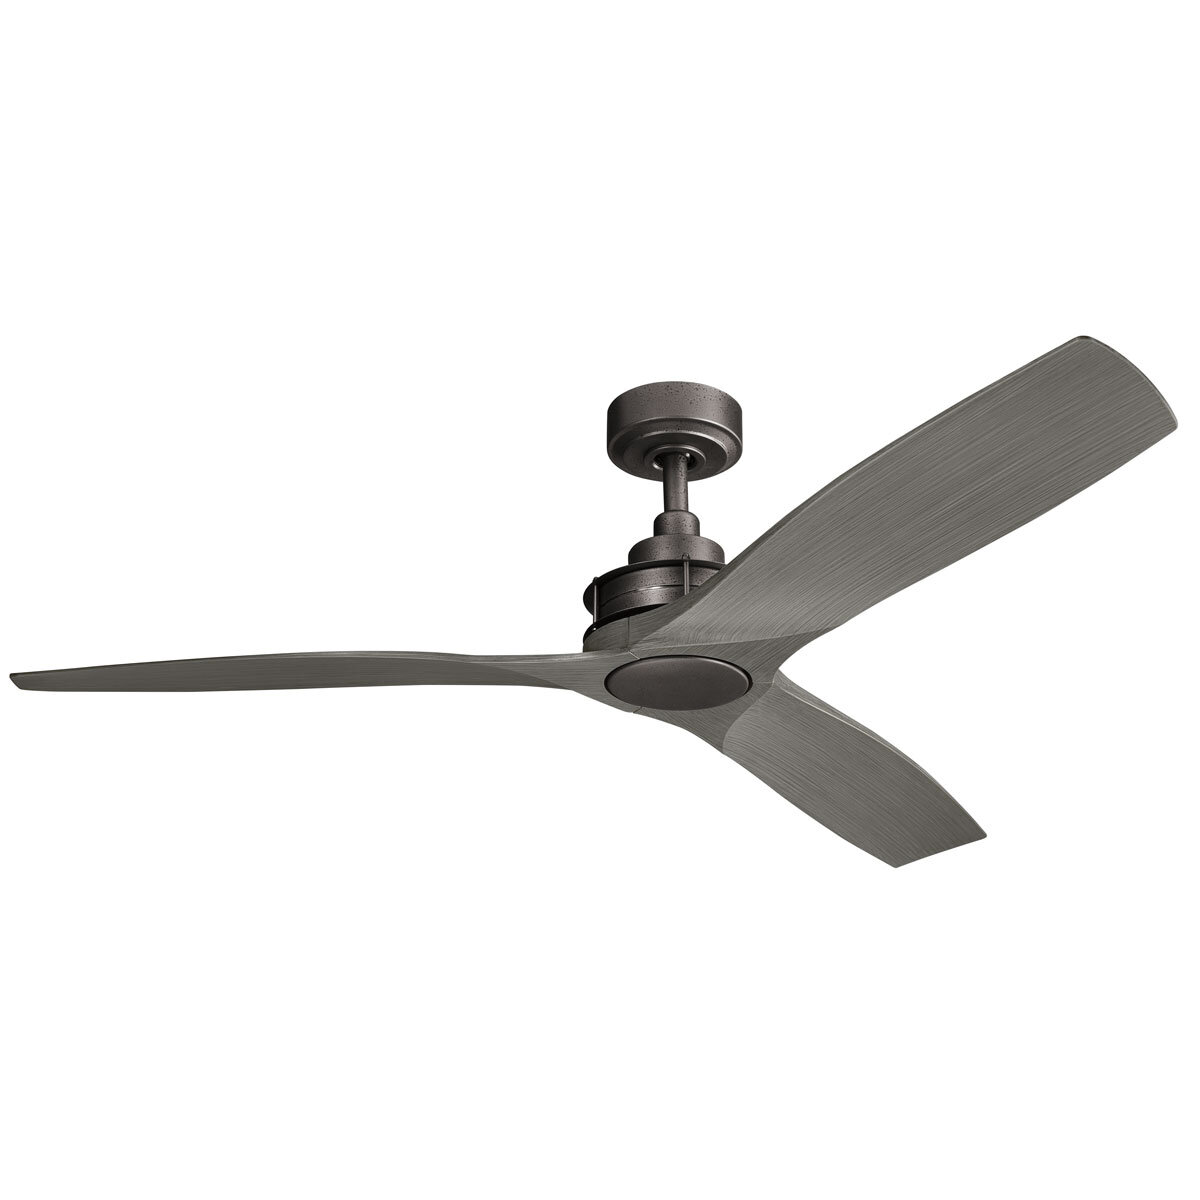 Ried 142cm indoor fan in Anvil Iron black finish with Driftwood Grey blades